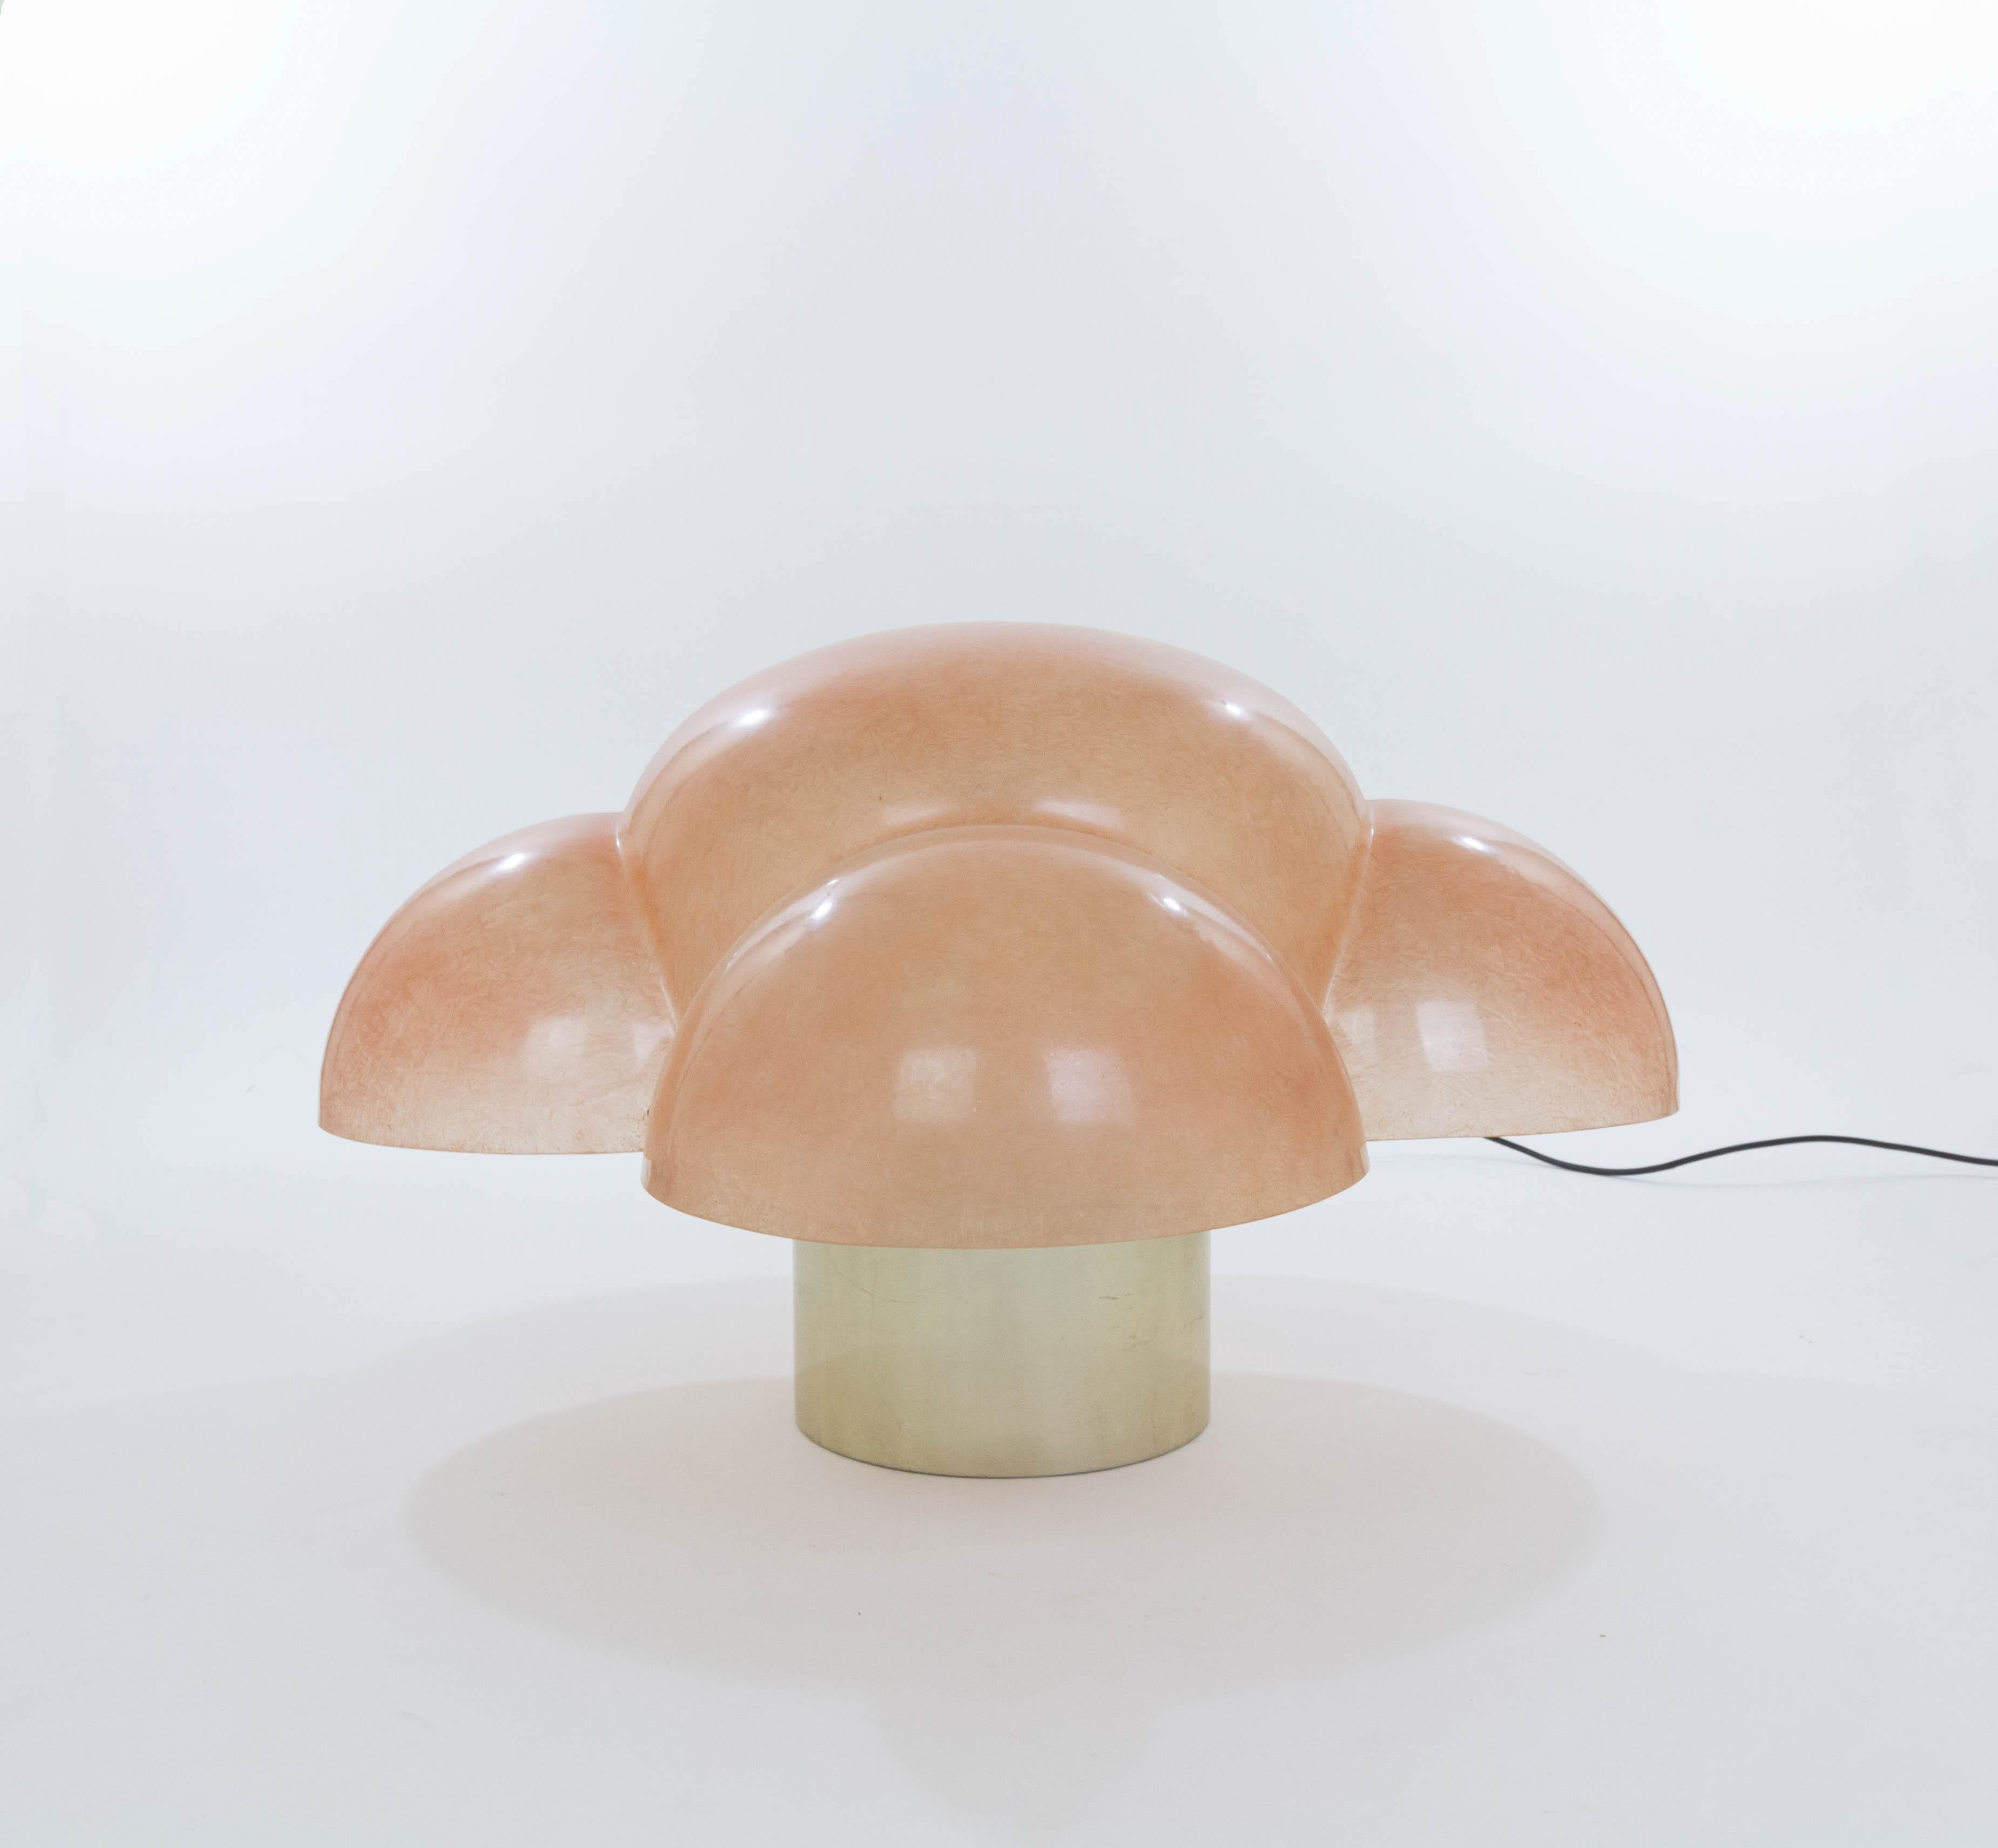 Luna table lamp designed by Gian Emilio, Piero and Anna Monti for Candle in 1968.

Impressive table lamp made of a fiberglass shade resting on a cylindrical metal gold coloured base. The lamp has 5 fittings (E27, maximum 60 watts). The switch has